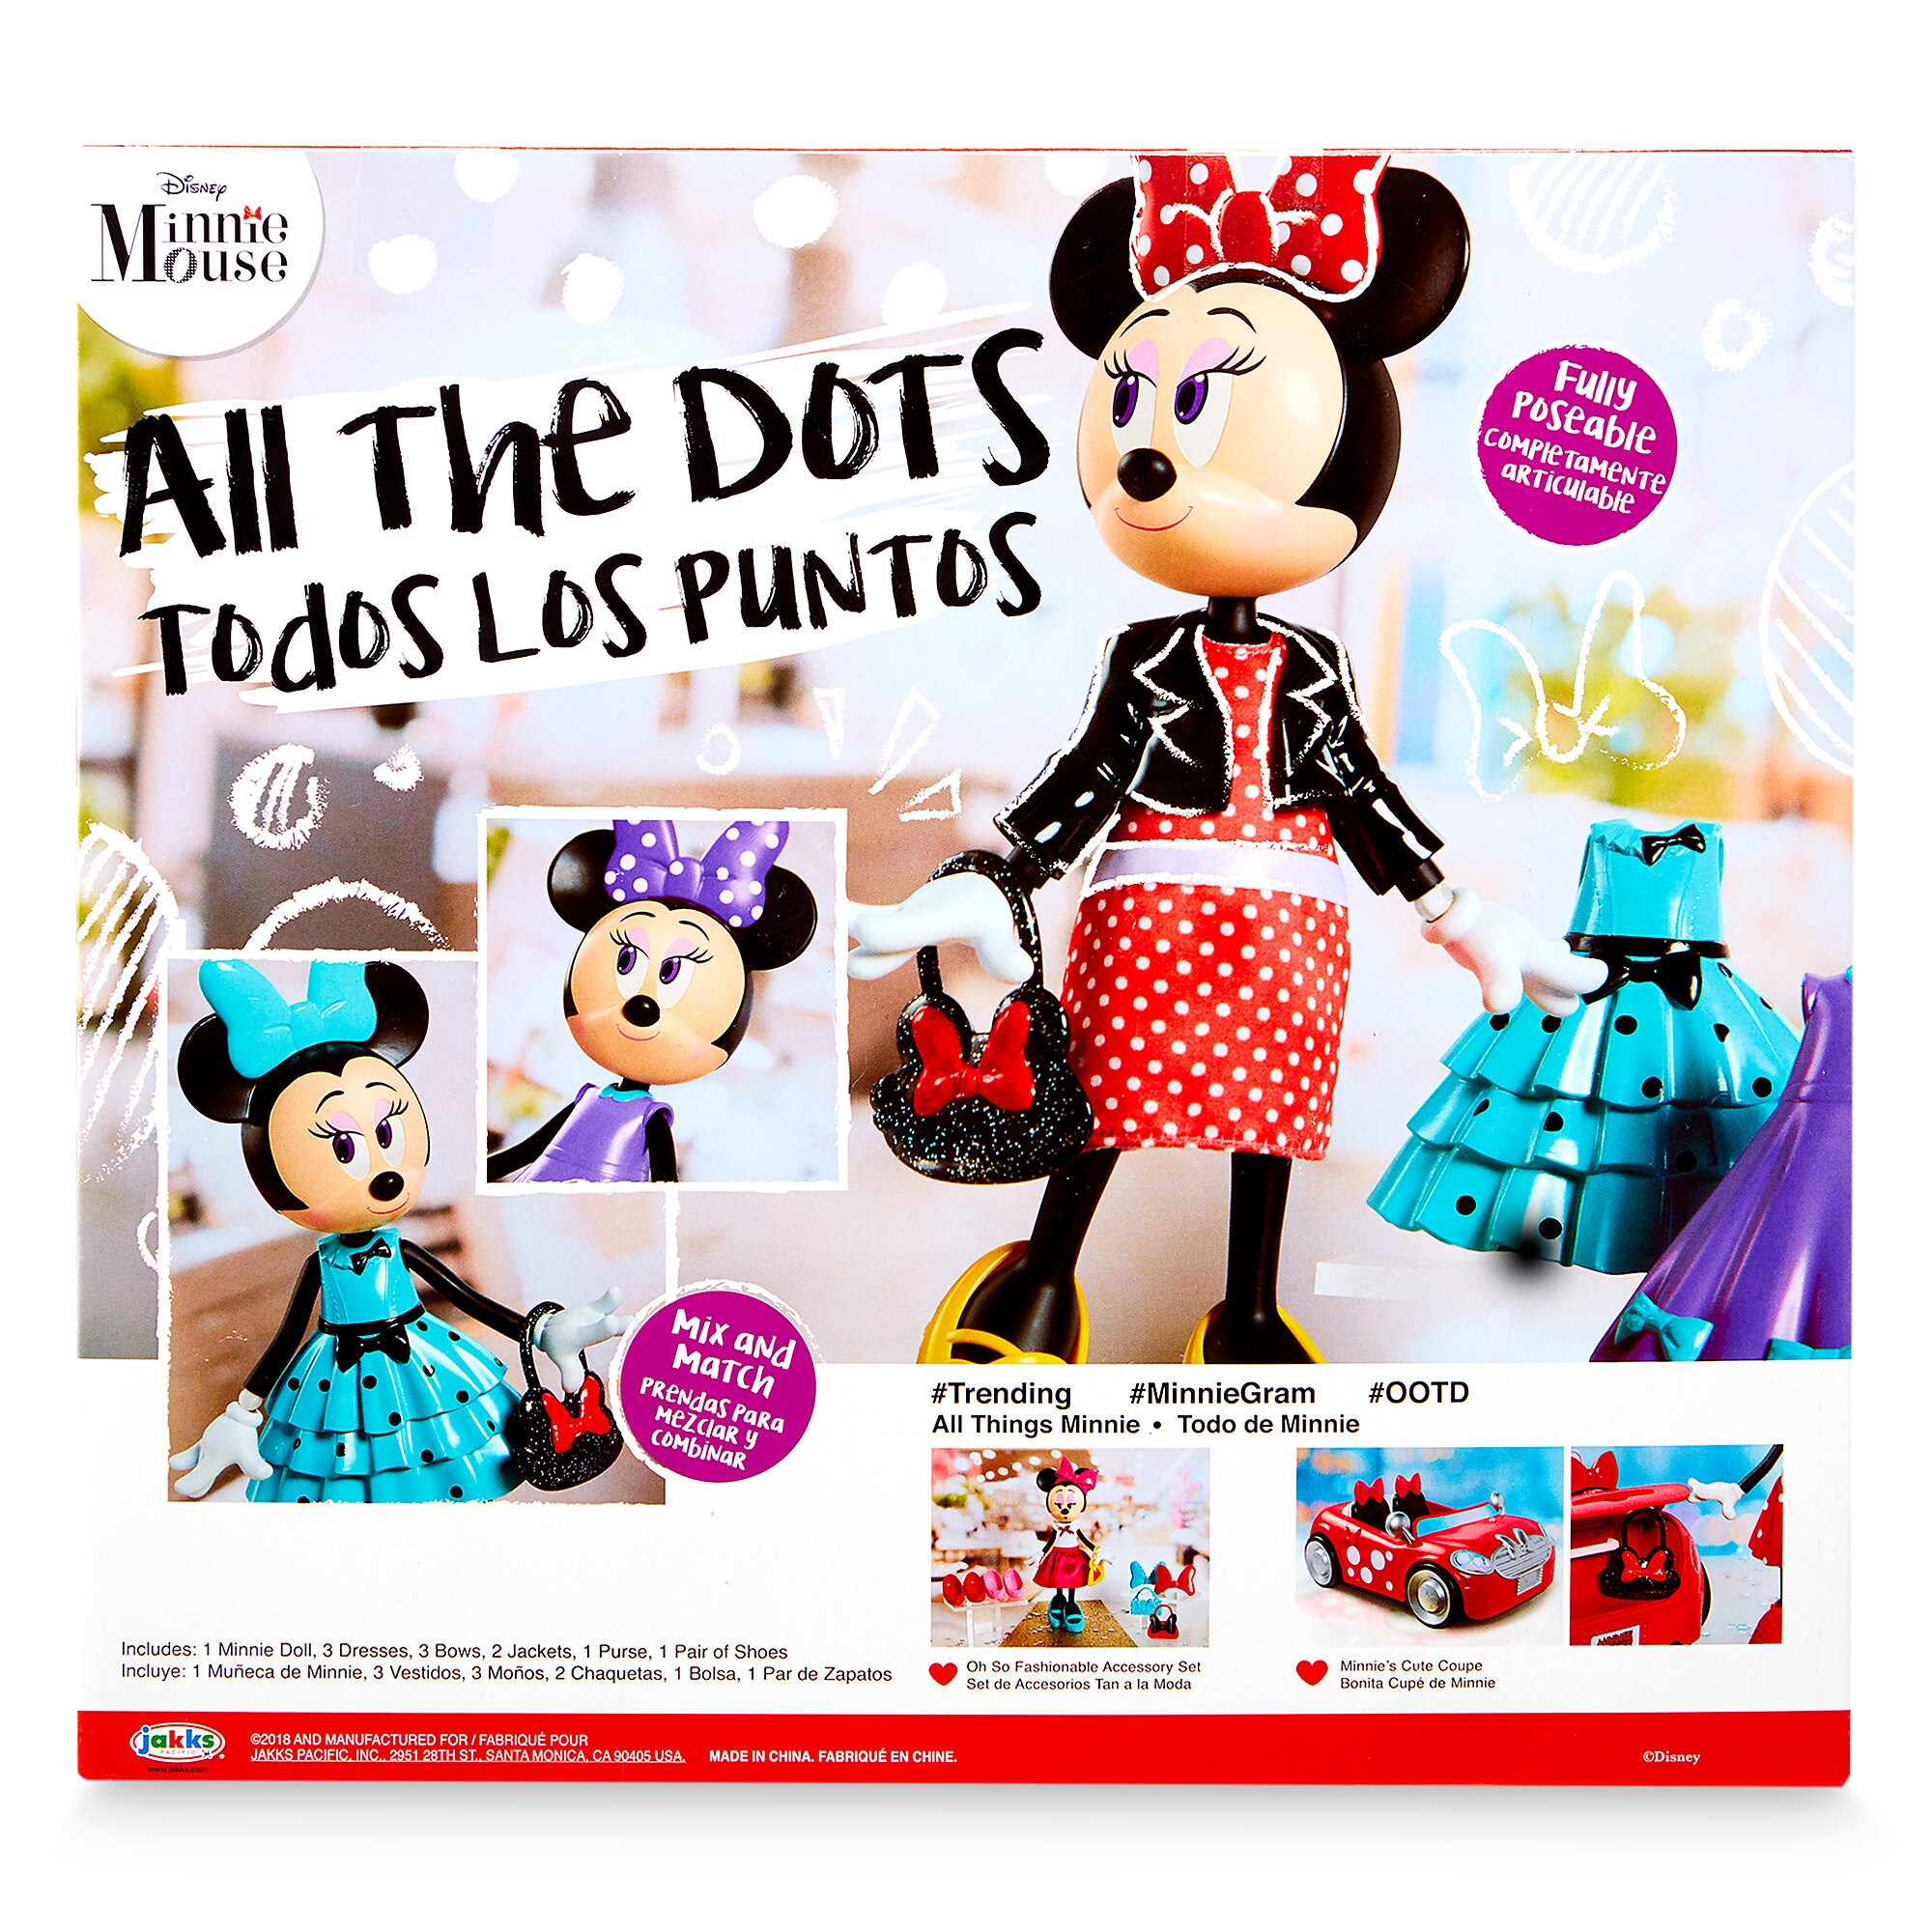 Minnie Mouse ''It's All About the Dots'' Doll Set